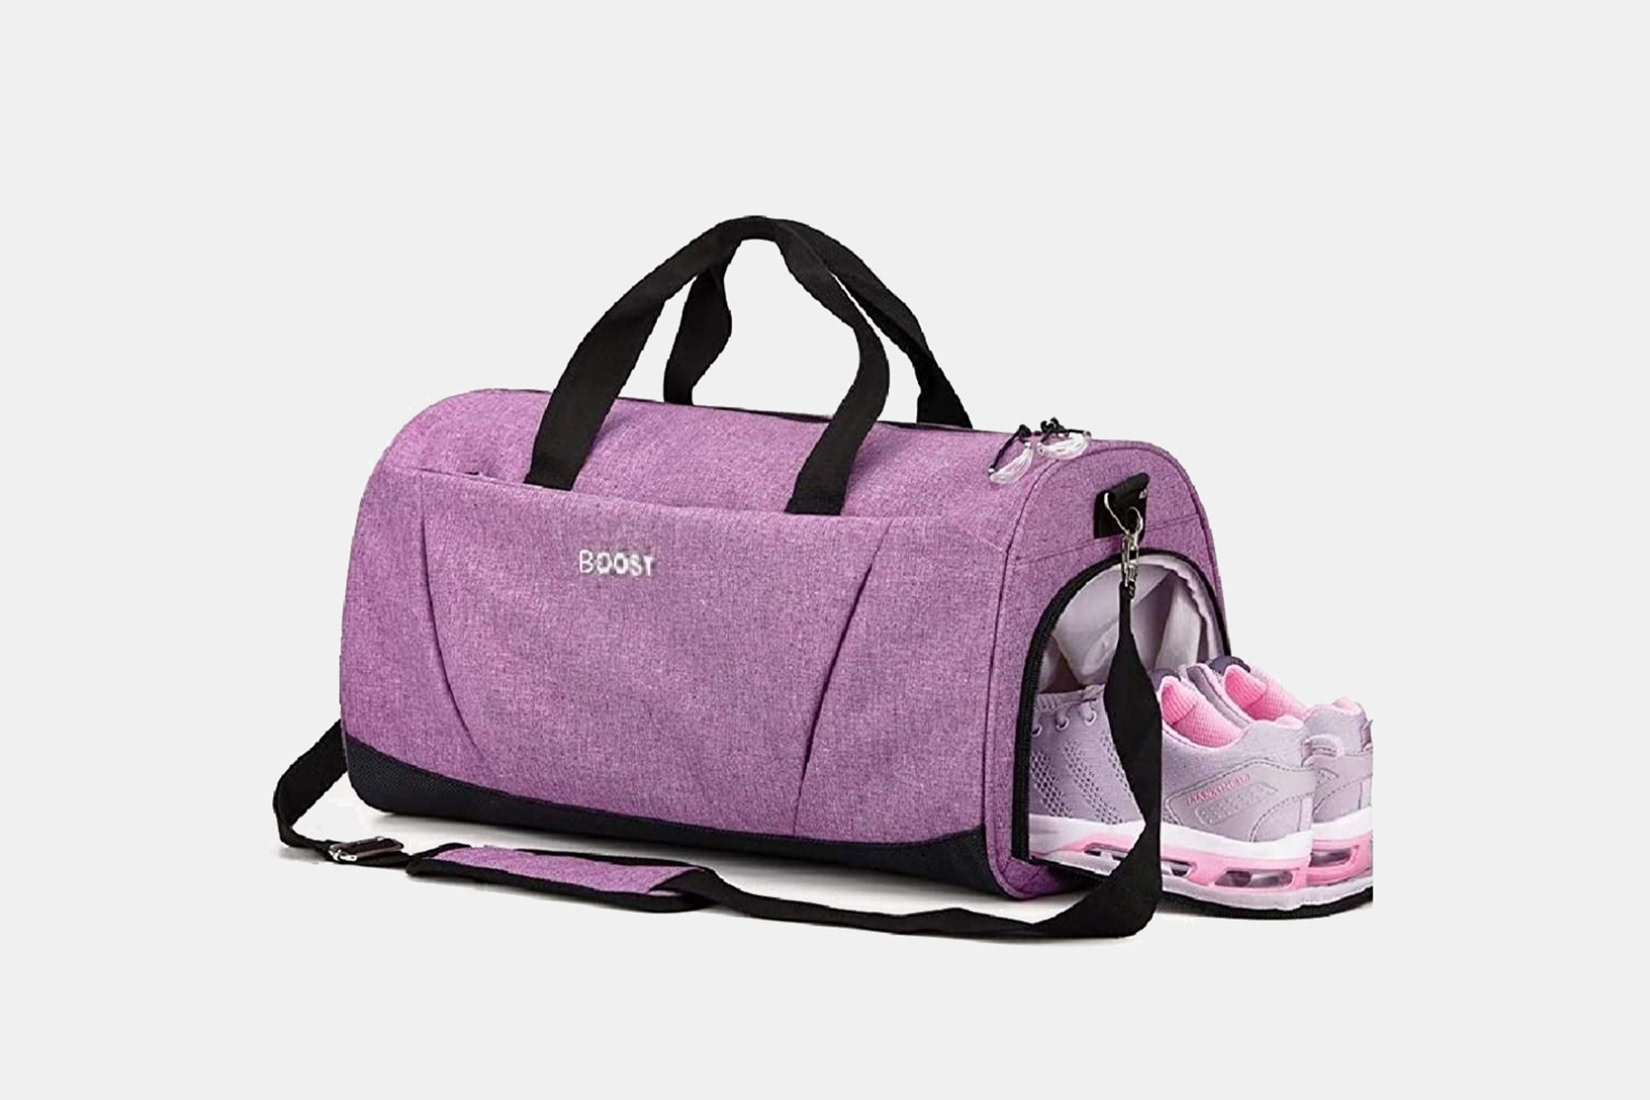 13 Best Gym Bags For Women: Stylish Workout & Fitness Bags (2020)